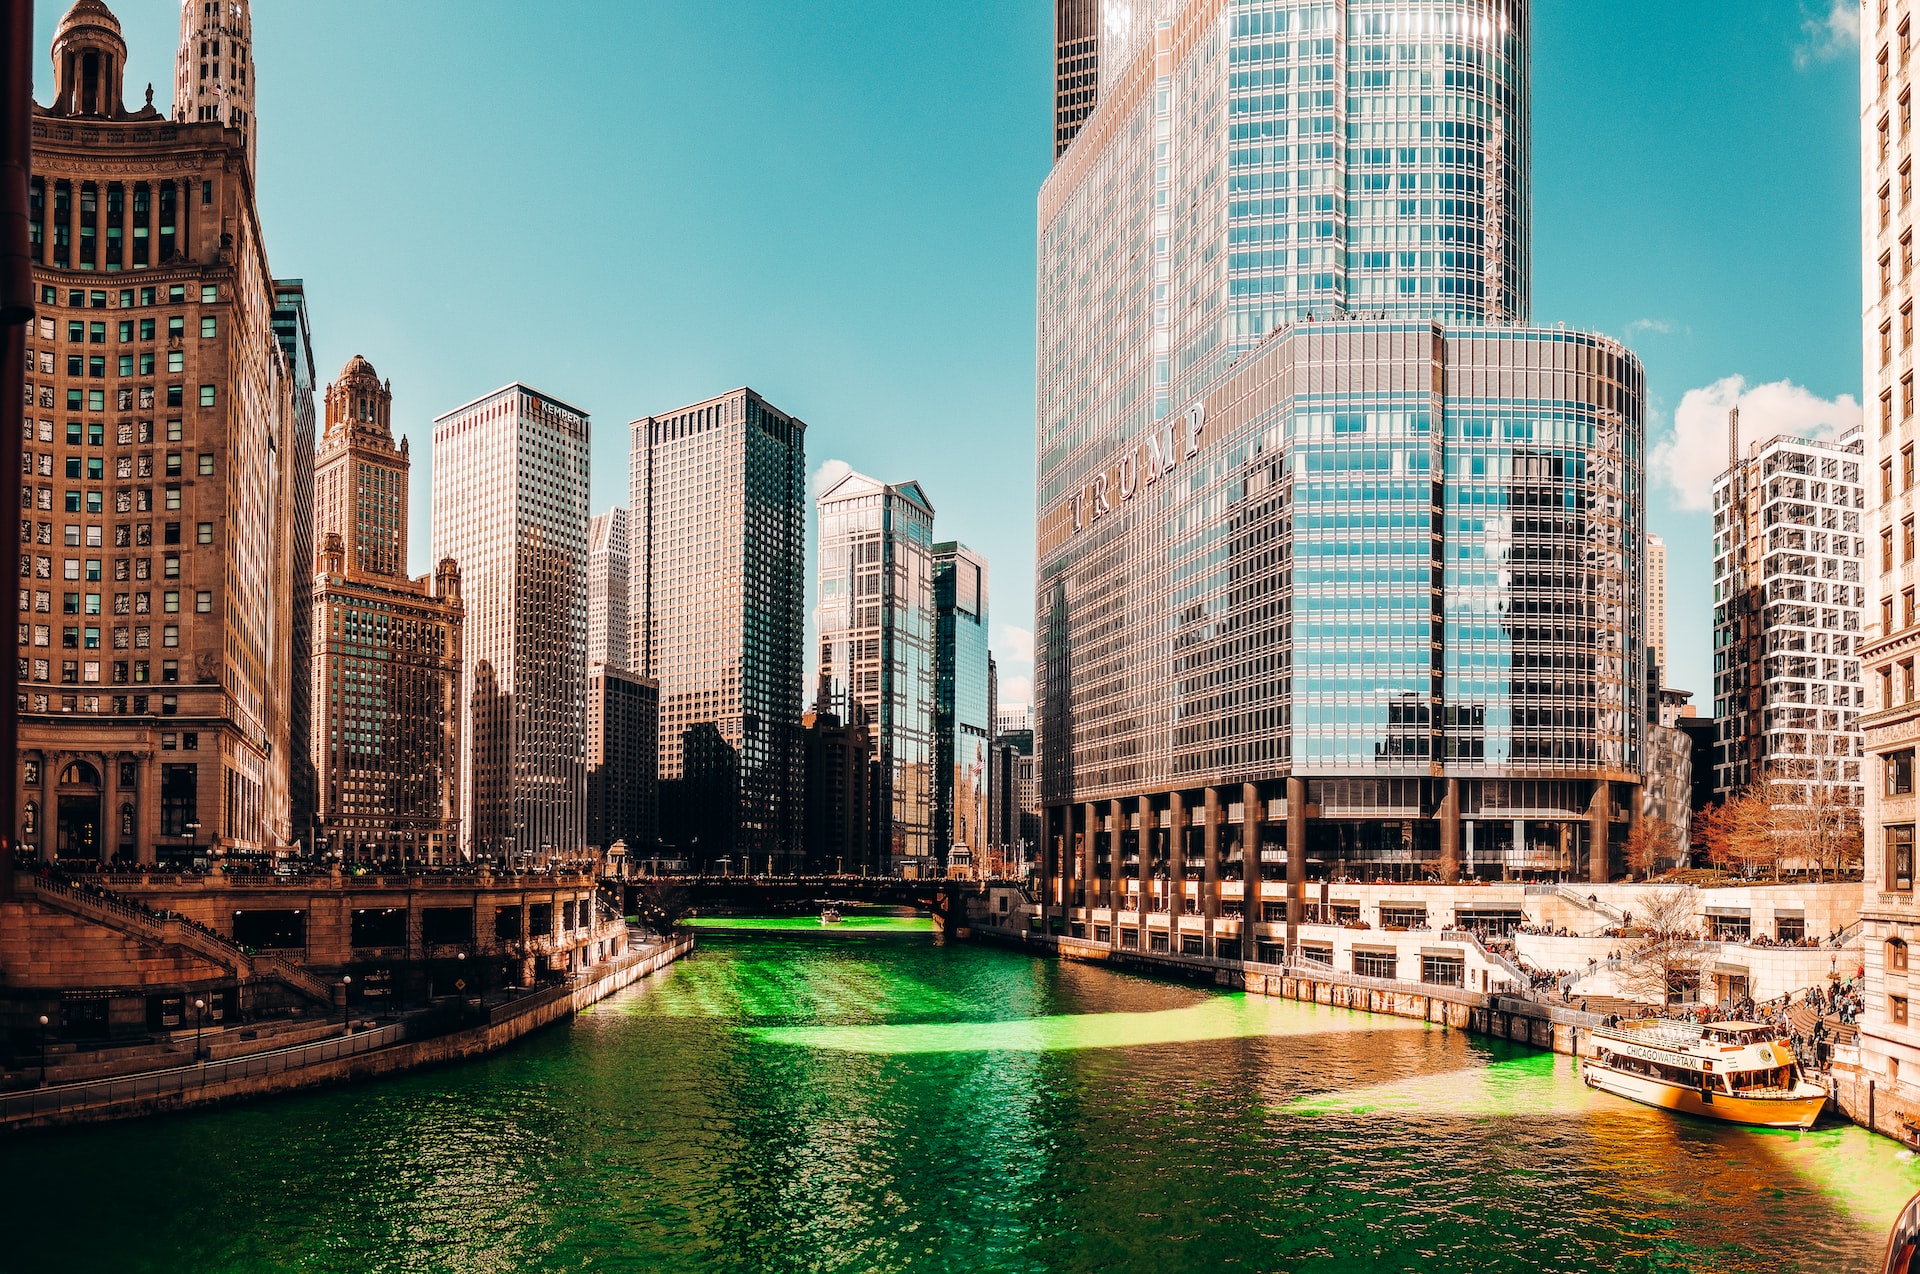 The river being dyed green in Chicago.